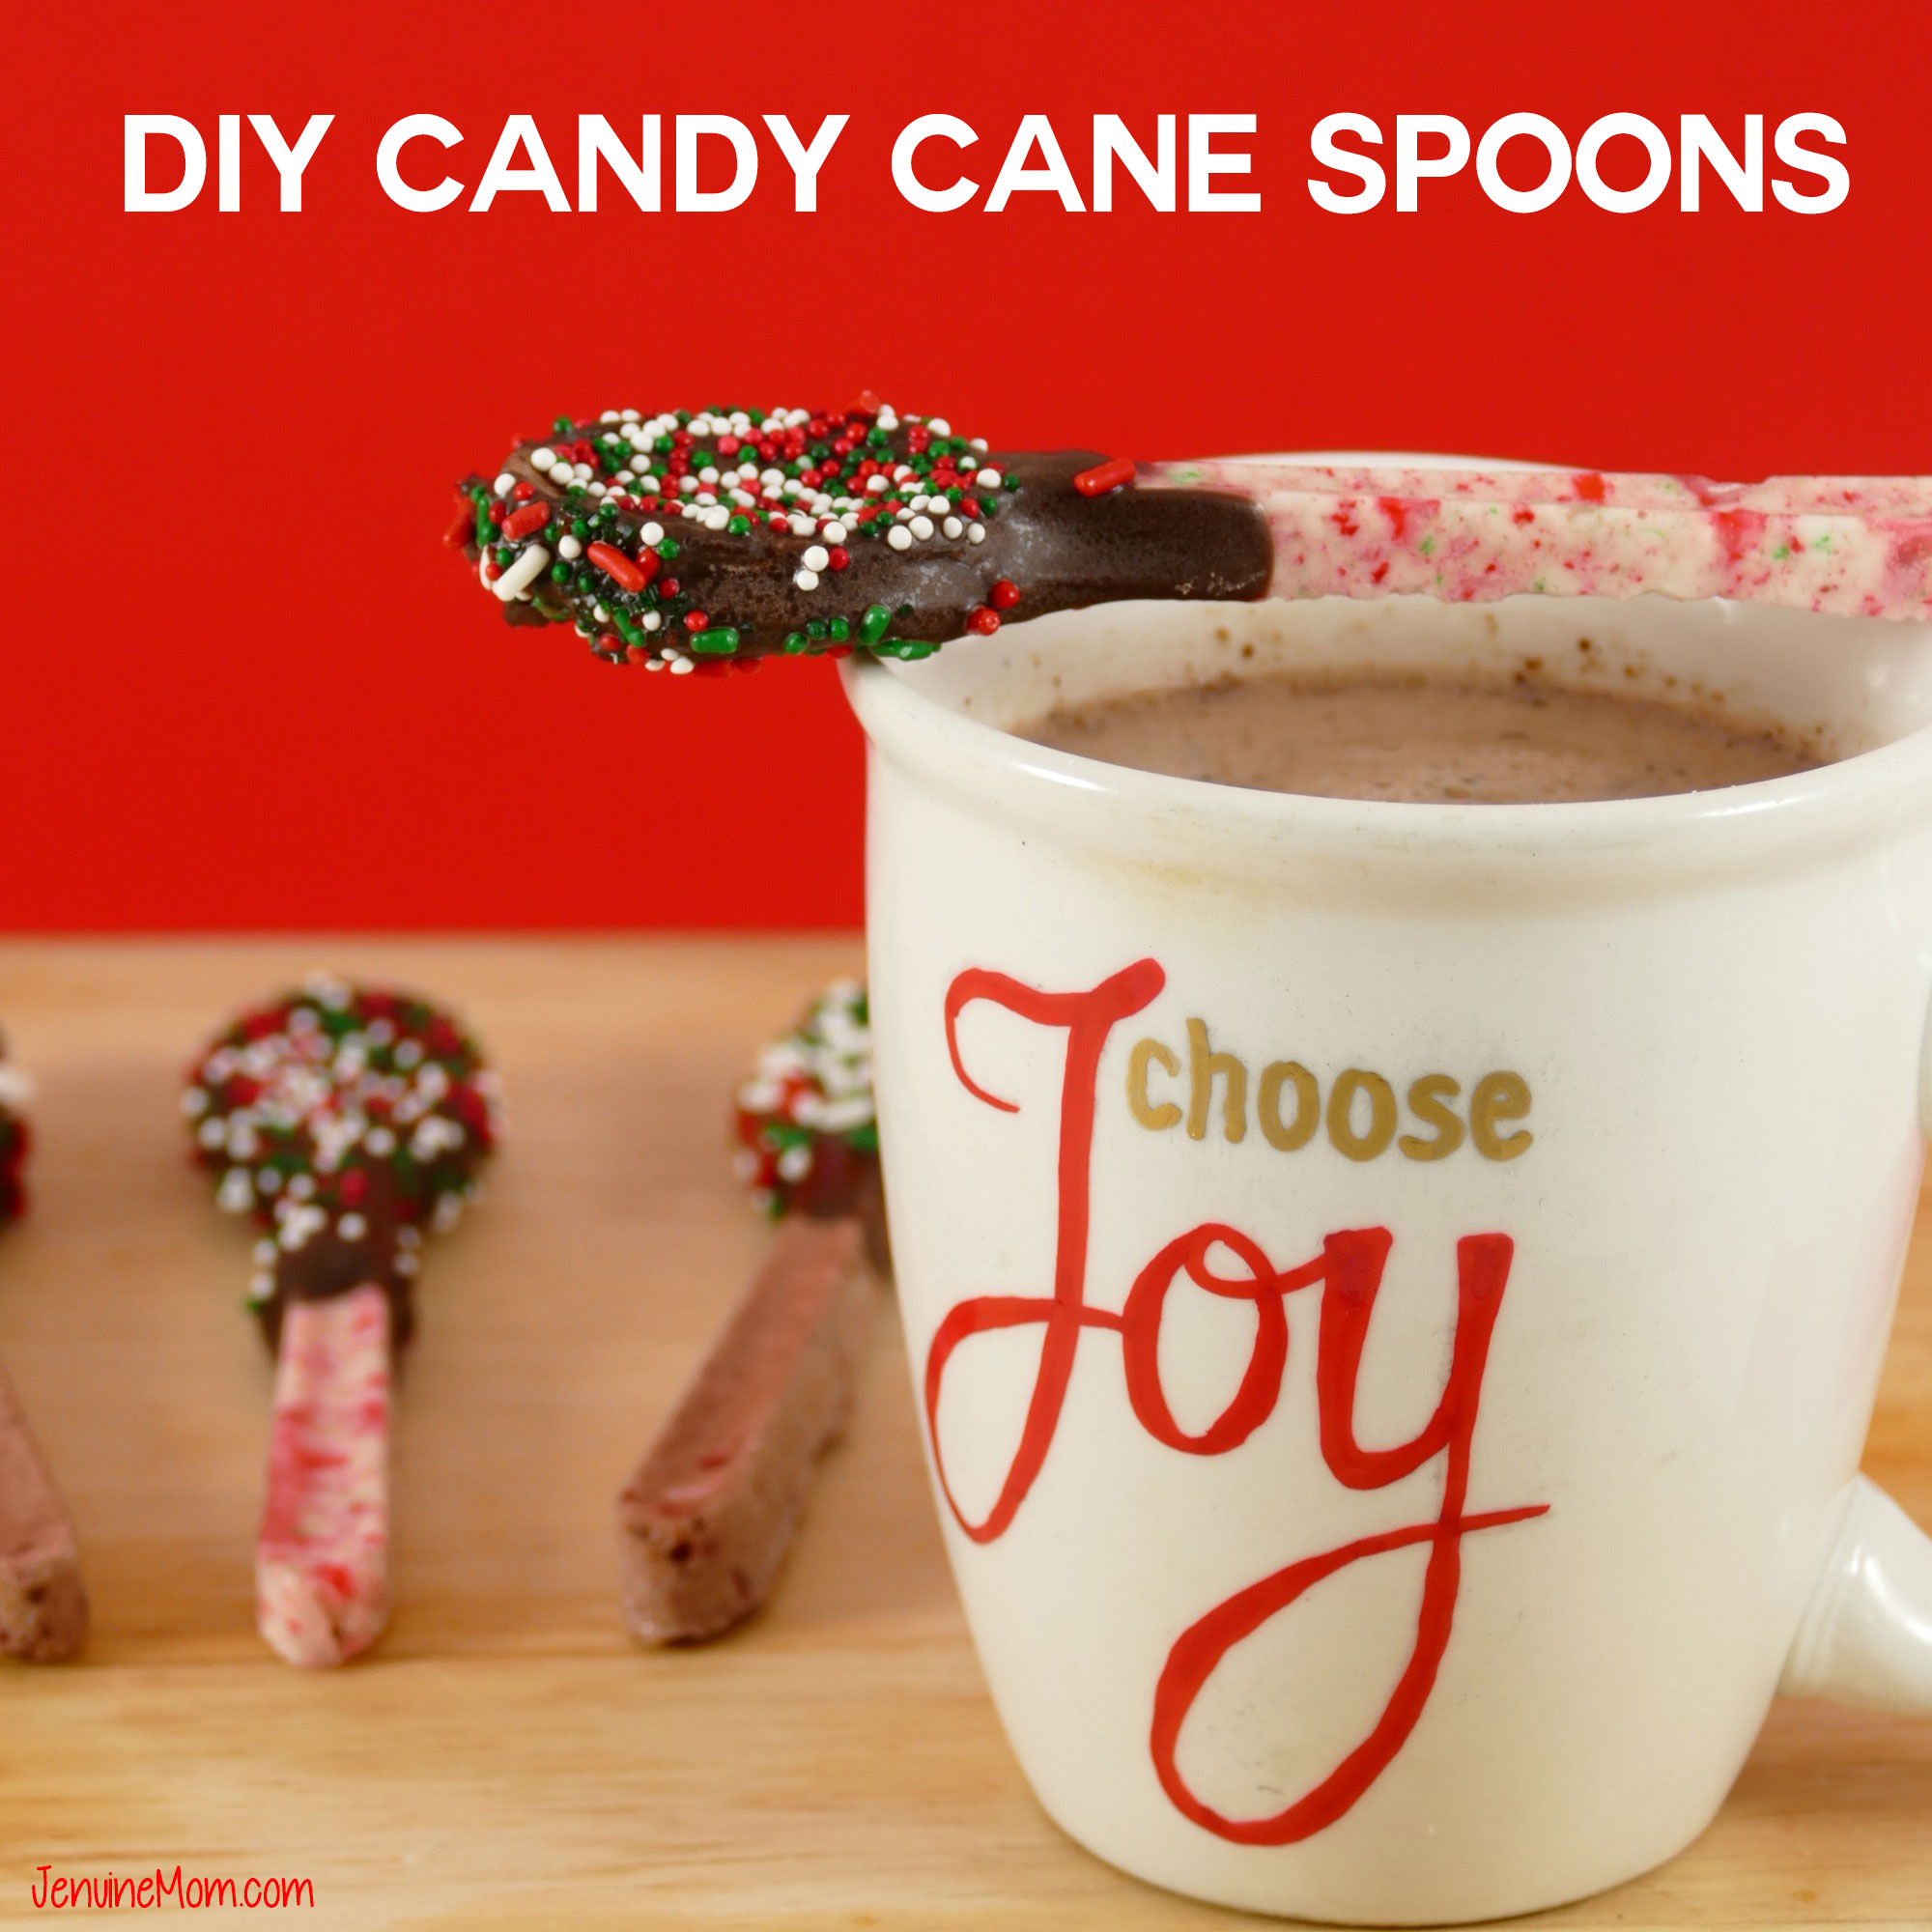 DIY Candy Cane Spoons: A Gift They’ll LOVE!